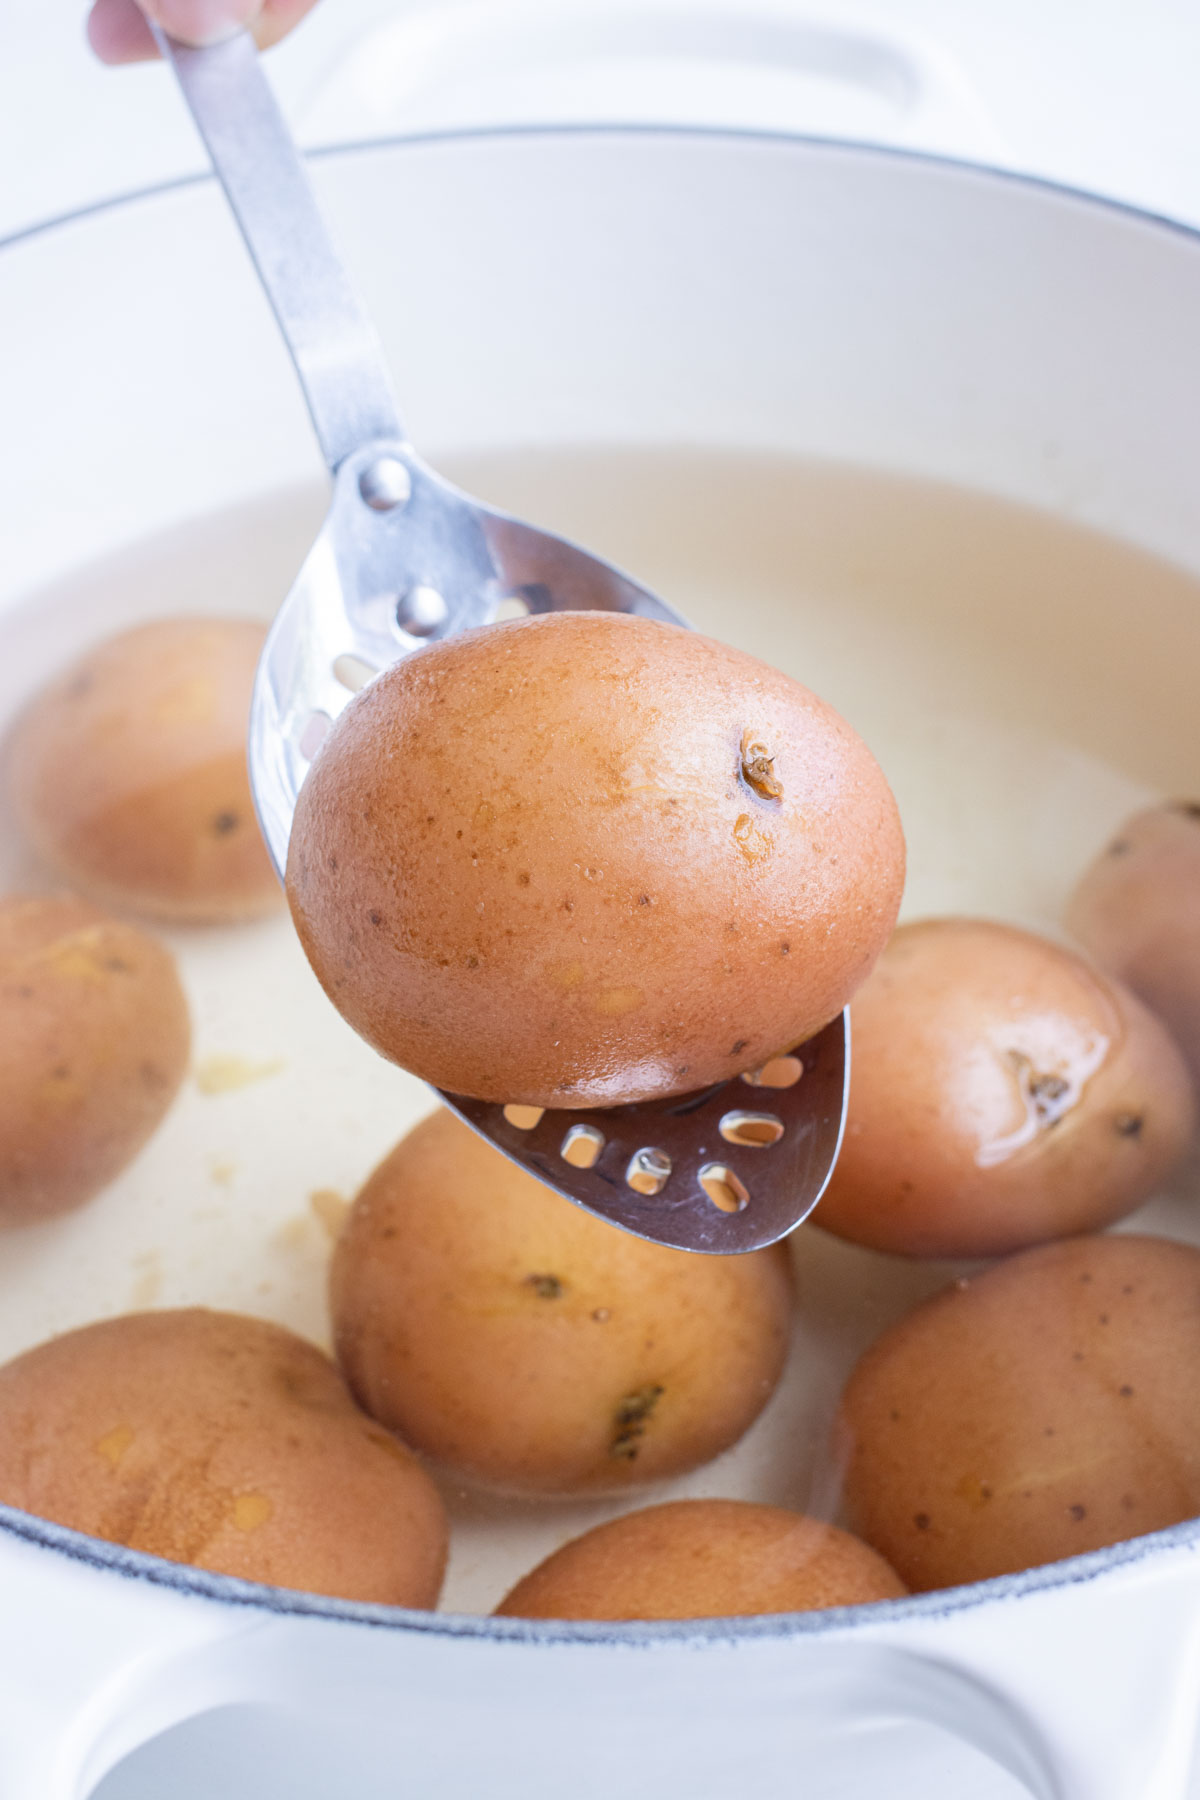 Potatoes are boiled in water until soft.